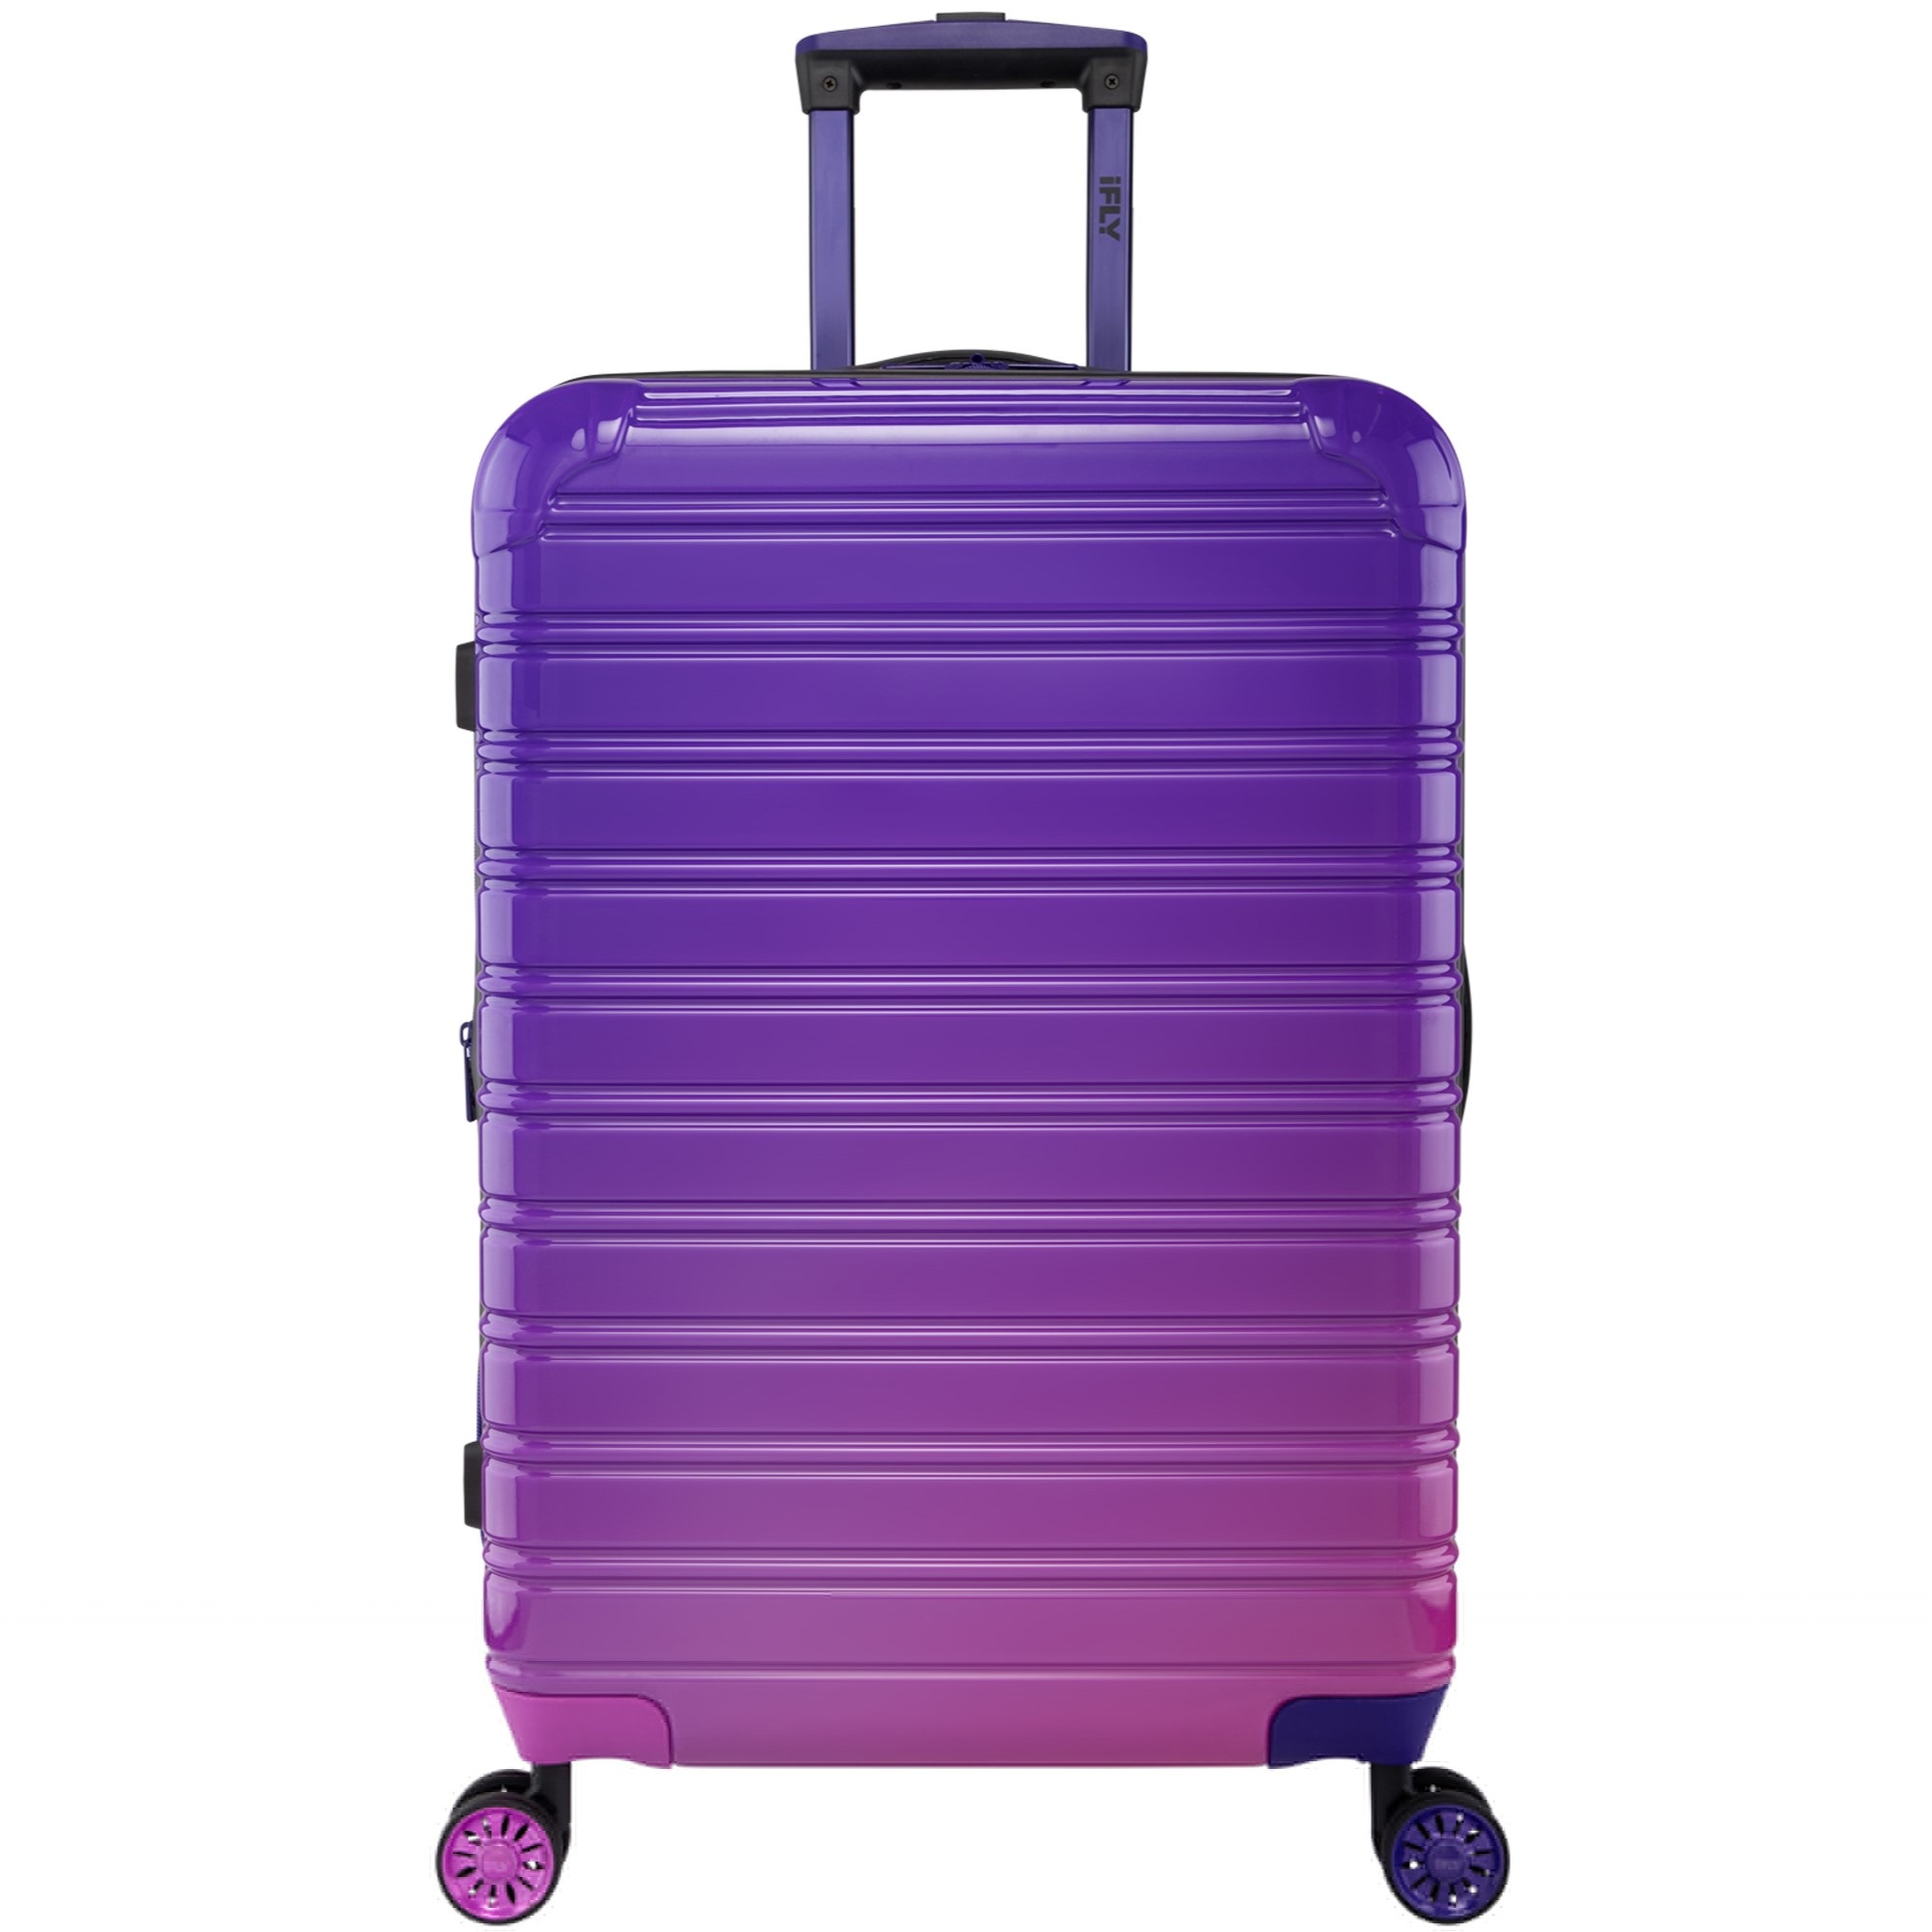 VALI MÀU TÍM LOANG DU LỊCH IFLY FIBERTECH OMBRE HARDSIDE LUGGAGE IN MIDNIGHT BERRY 9